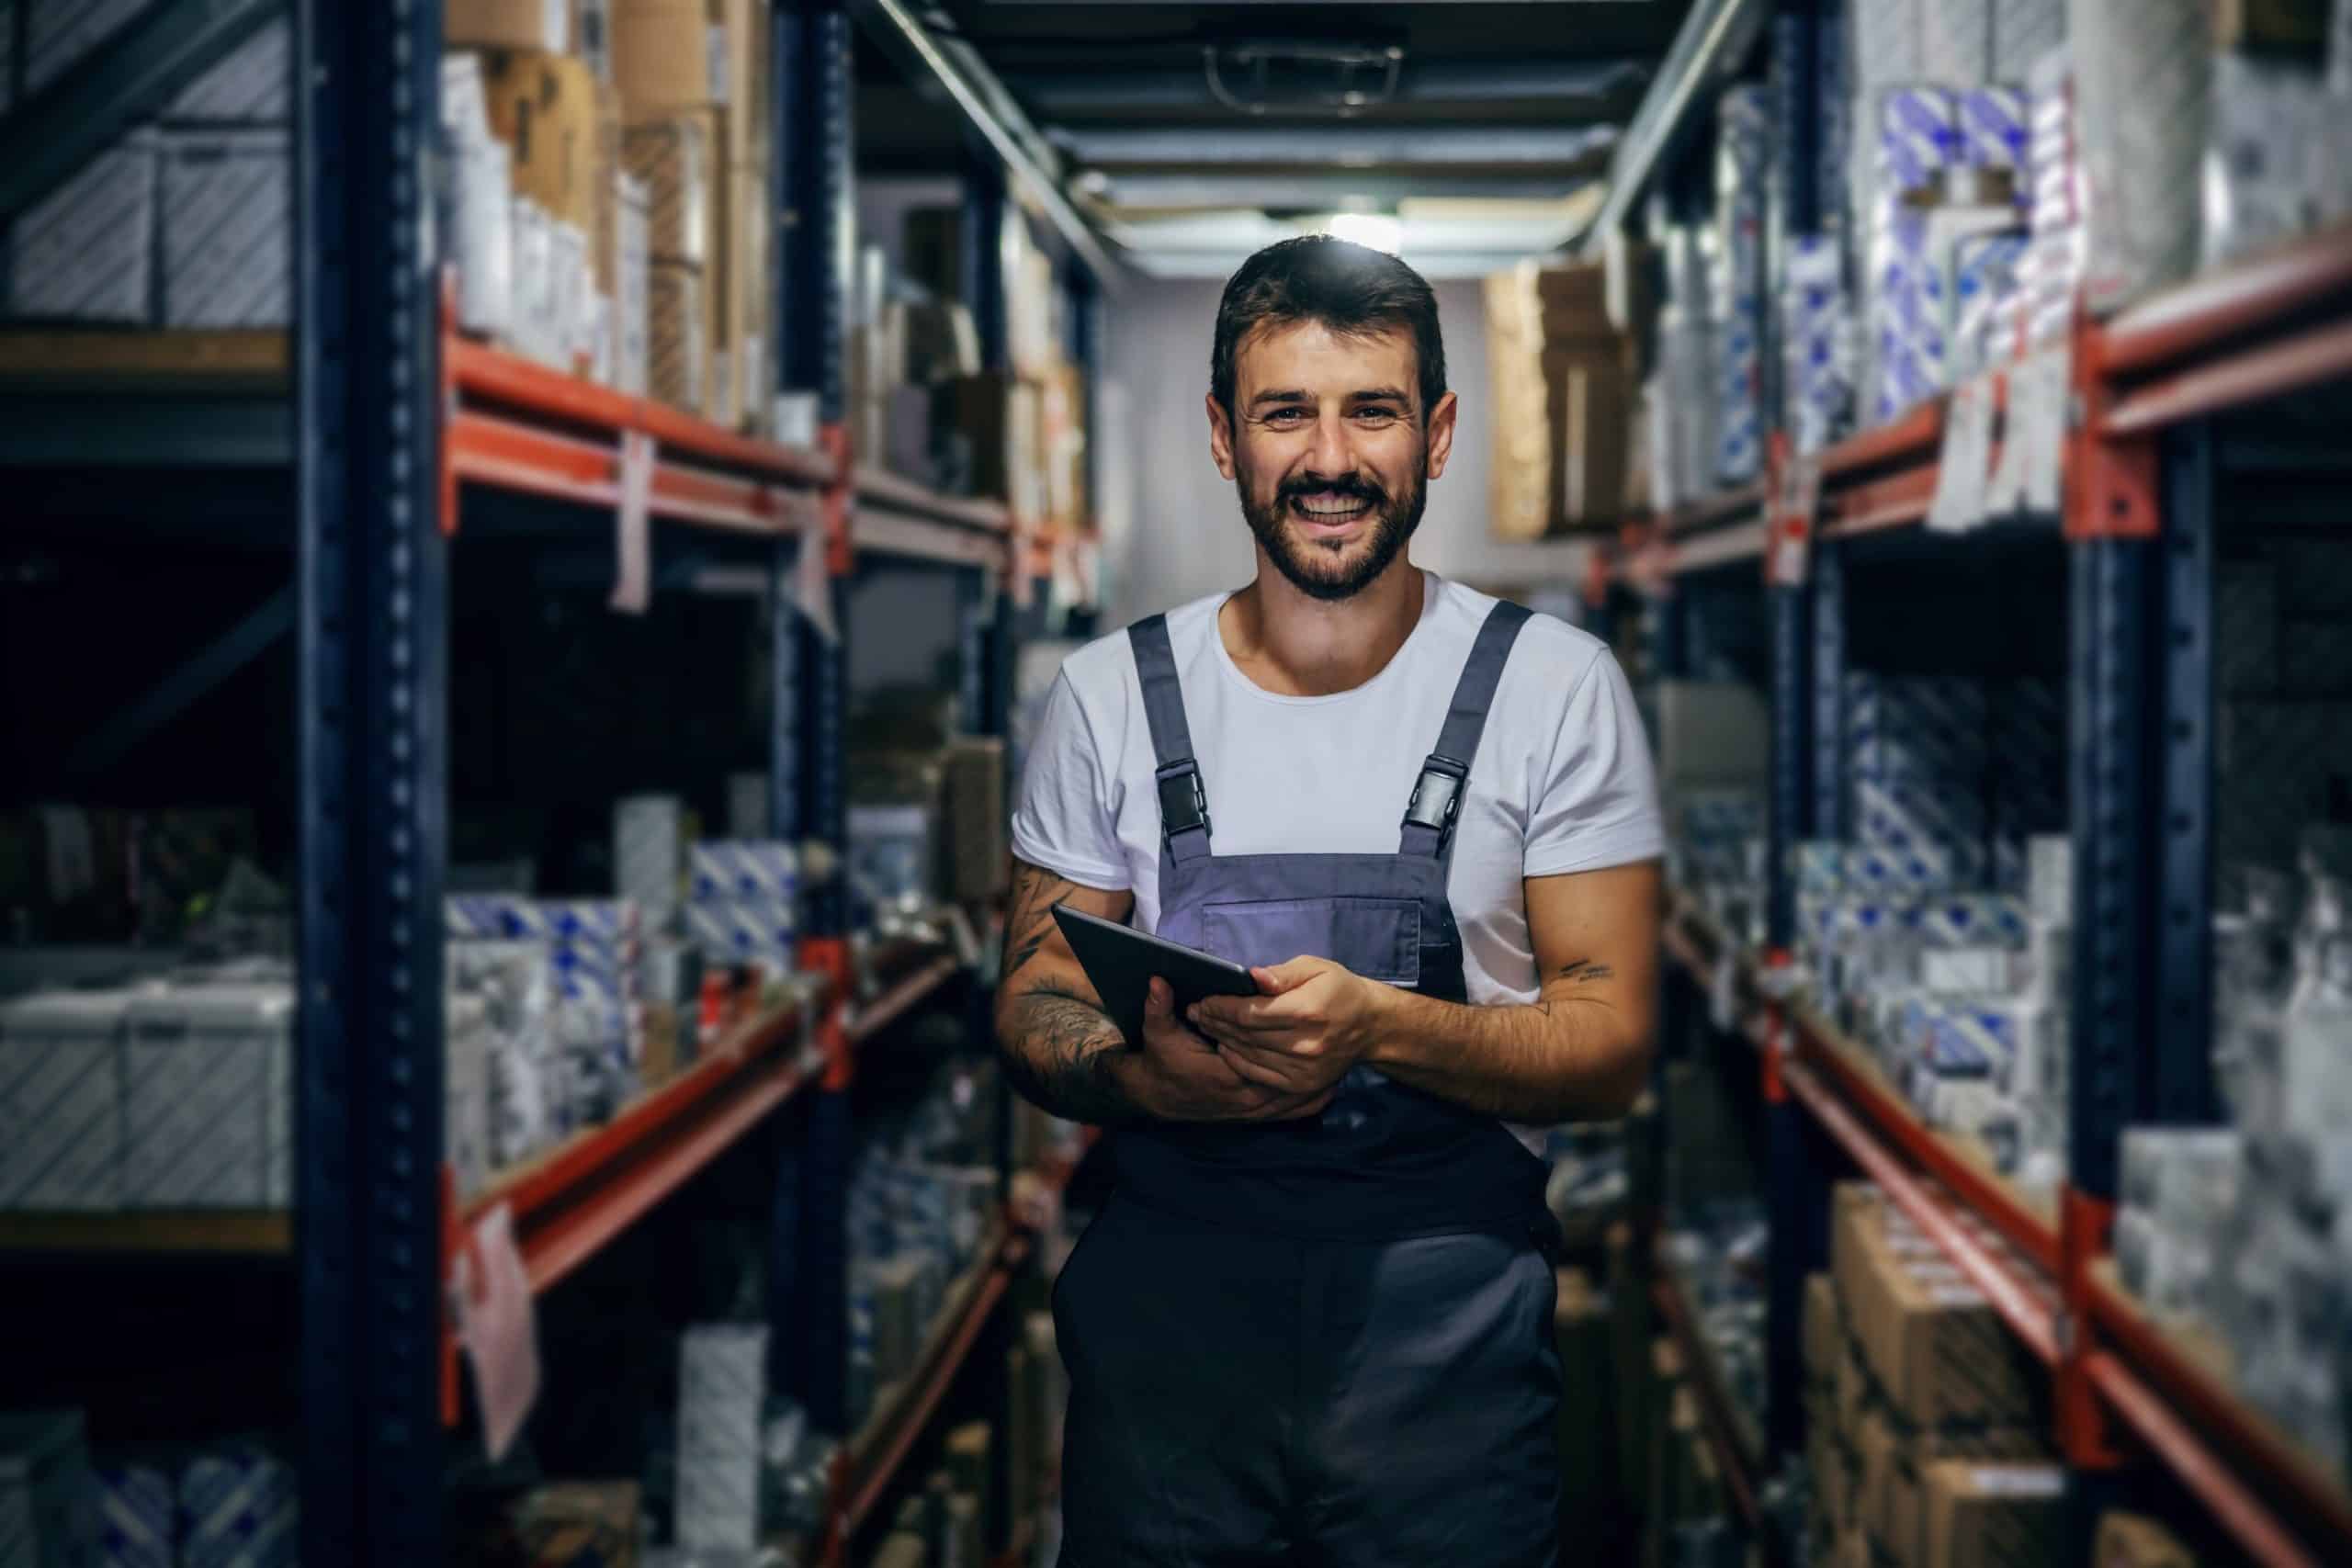 Man standing in warehouse aisle